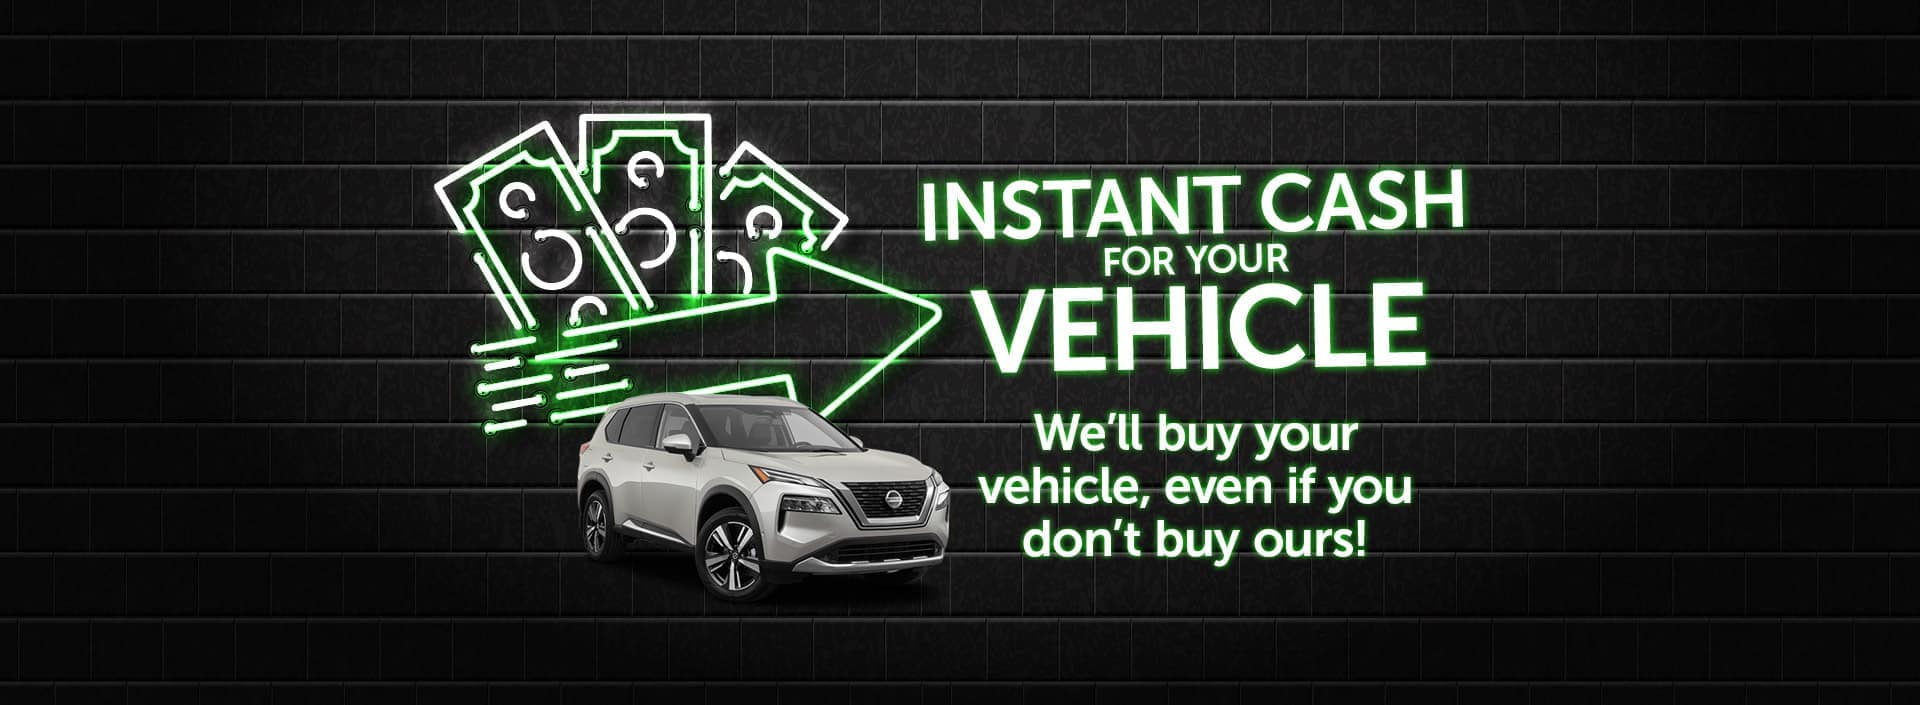 Instant Cash for your Vehicle